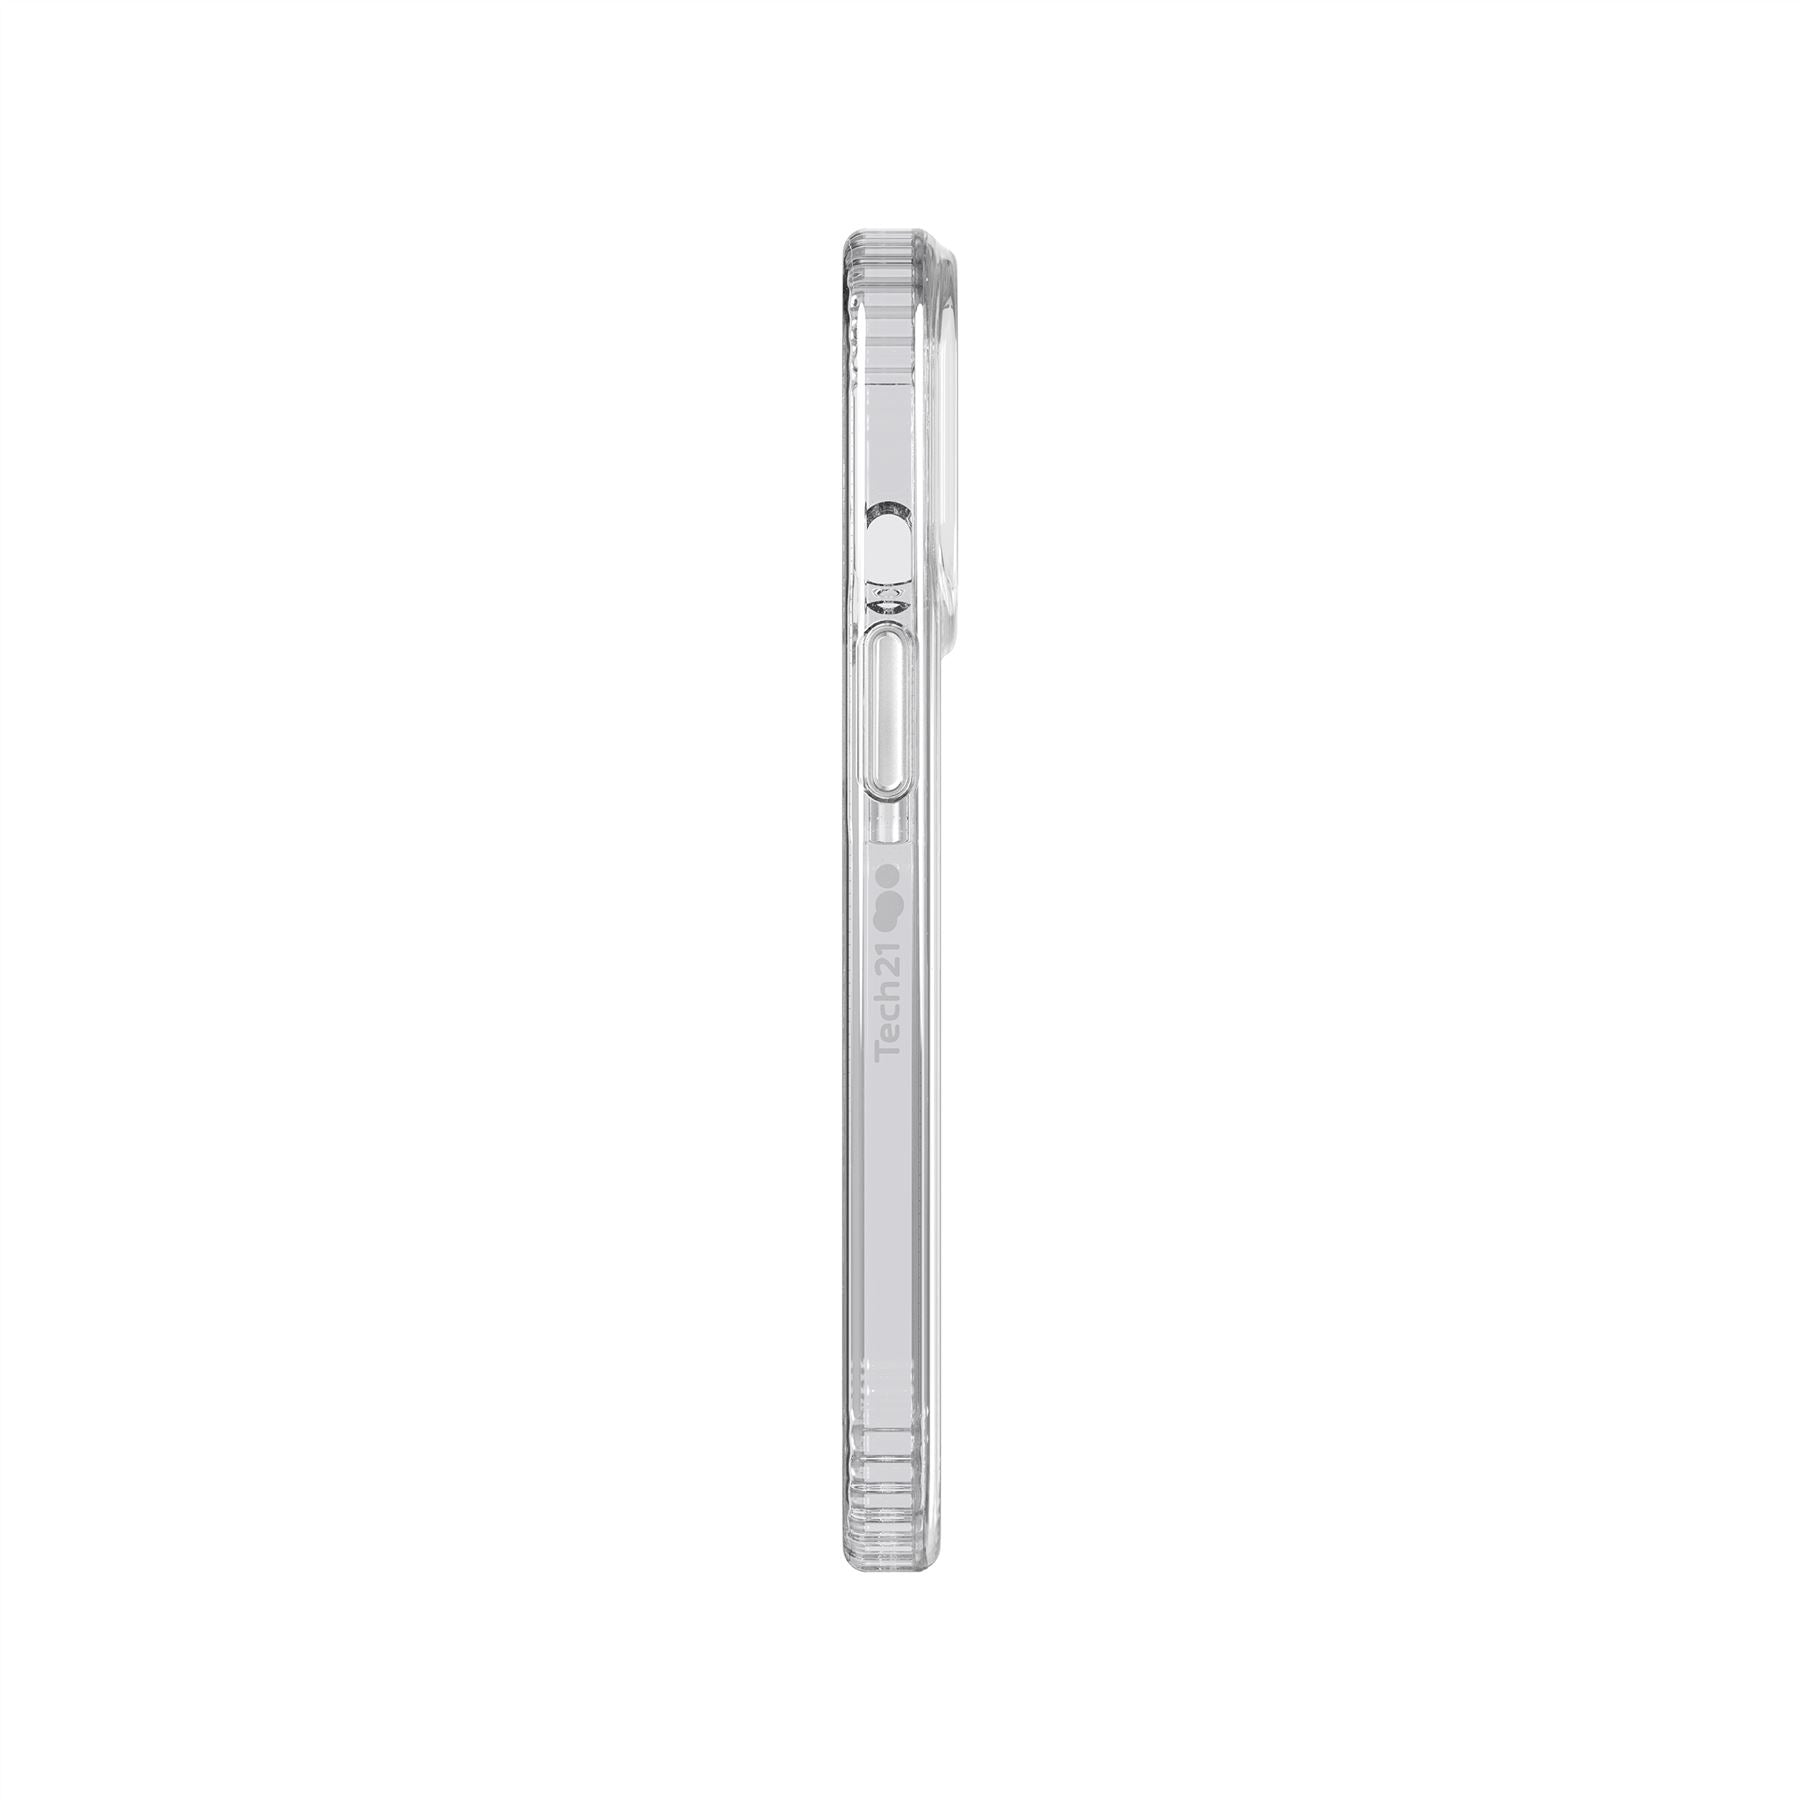 Evo Clear - Apple iPhone 13 Pro Case - Clear